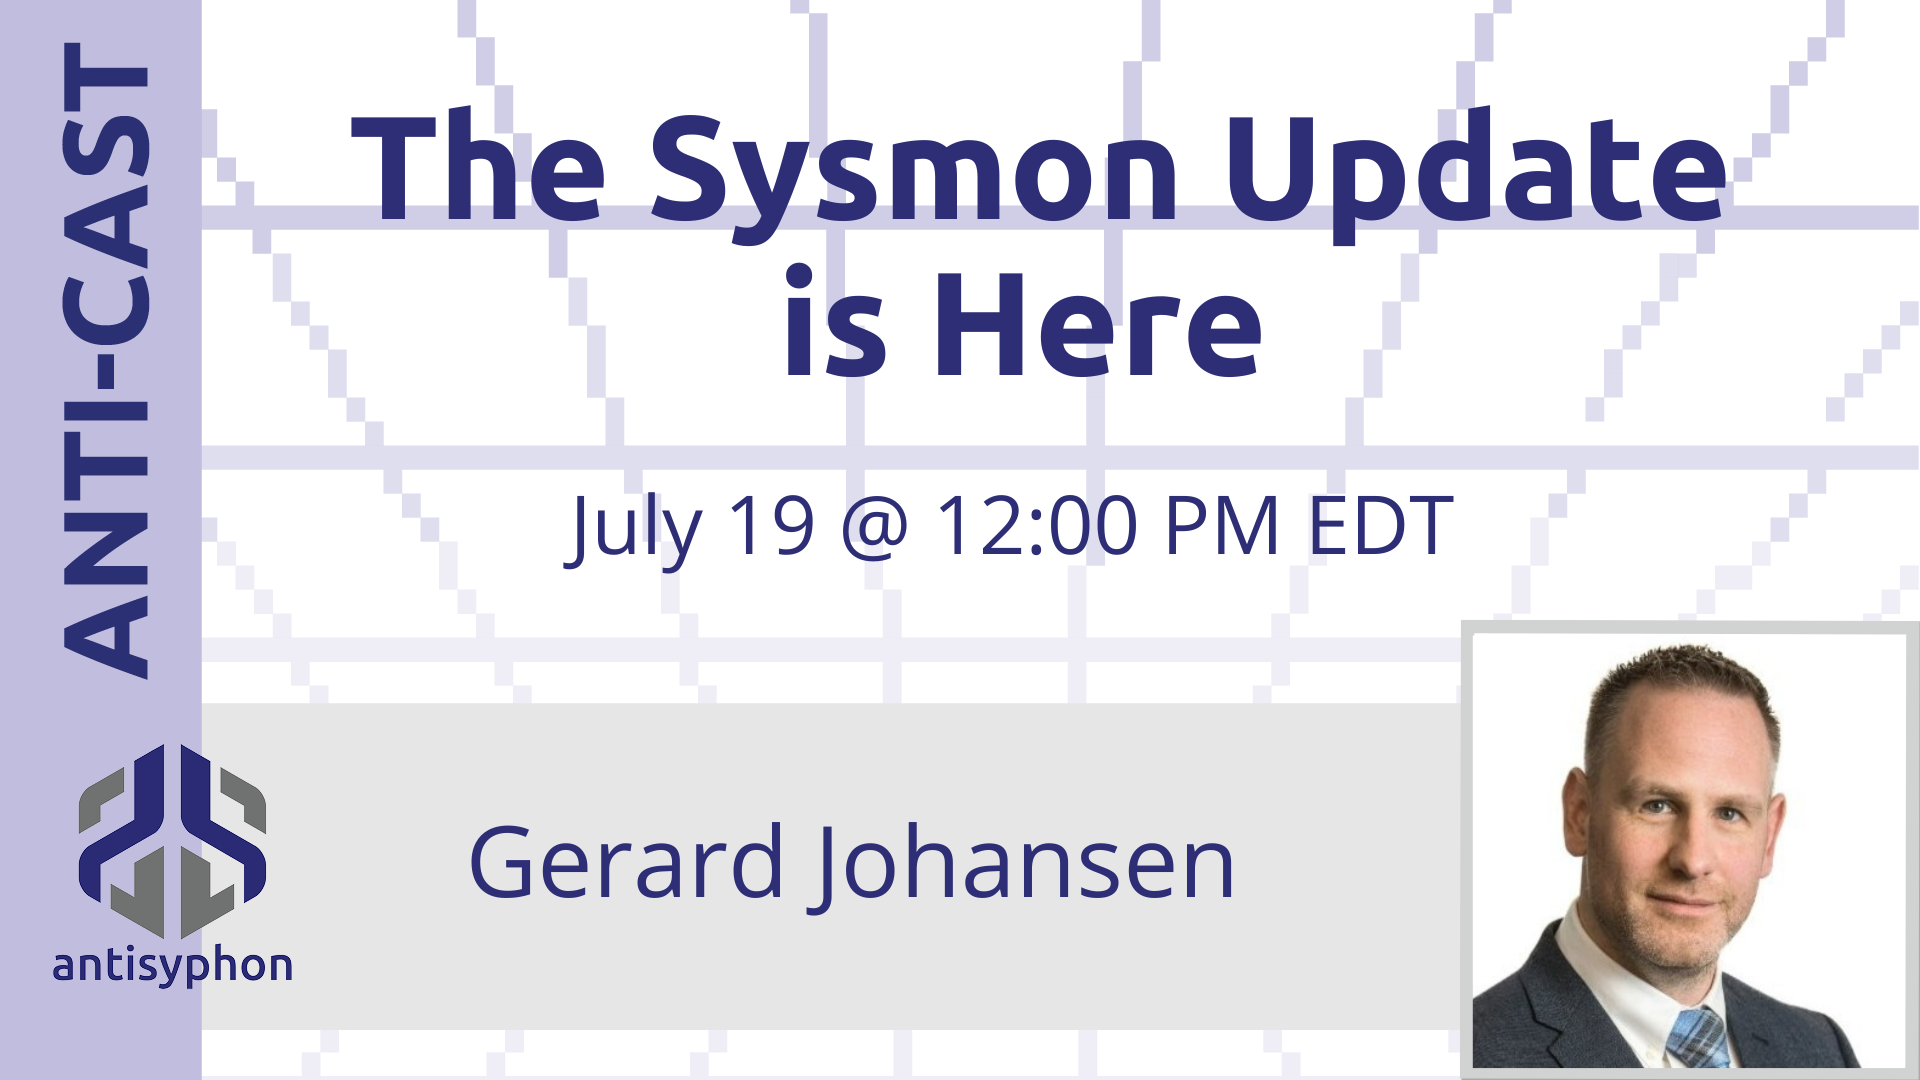 The long-awaited update to Sysmon is here!